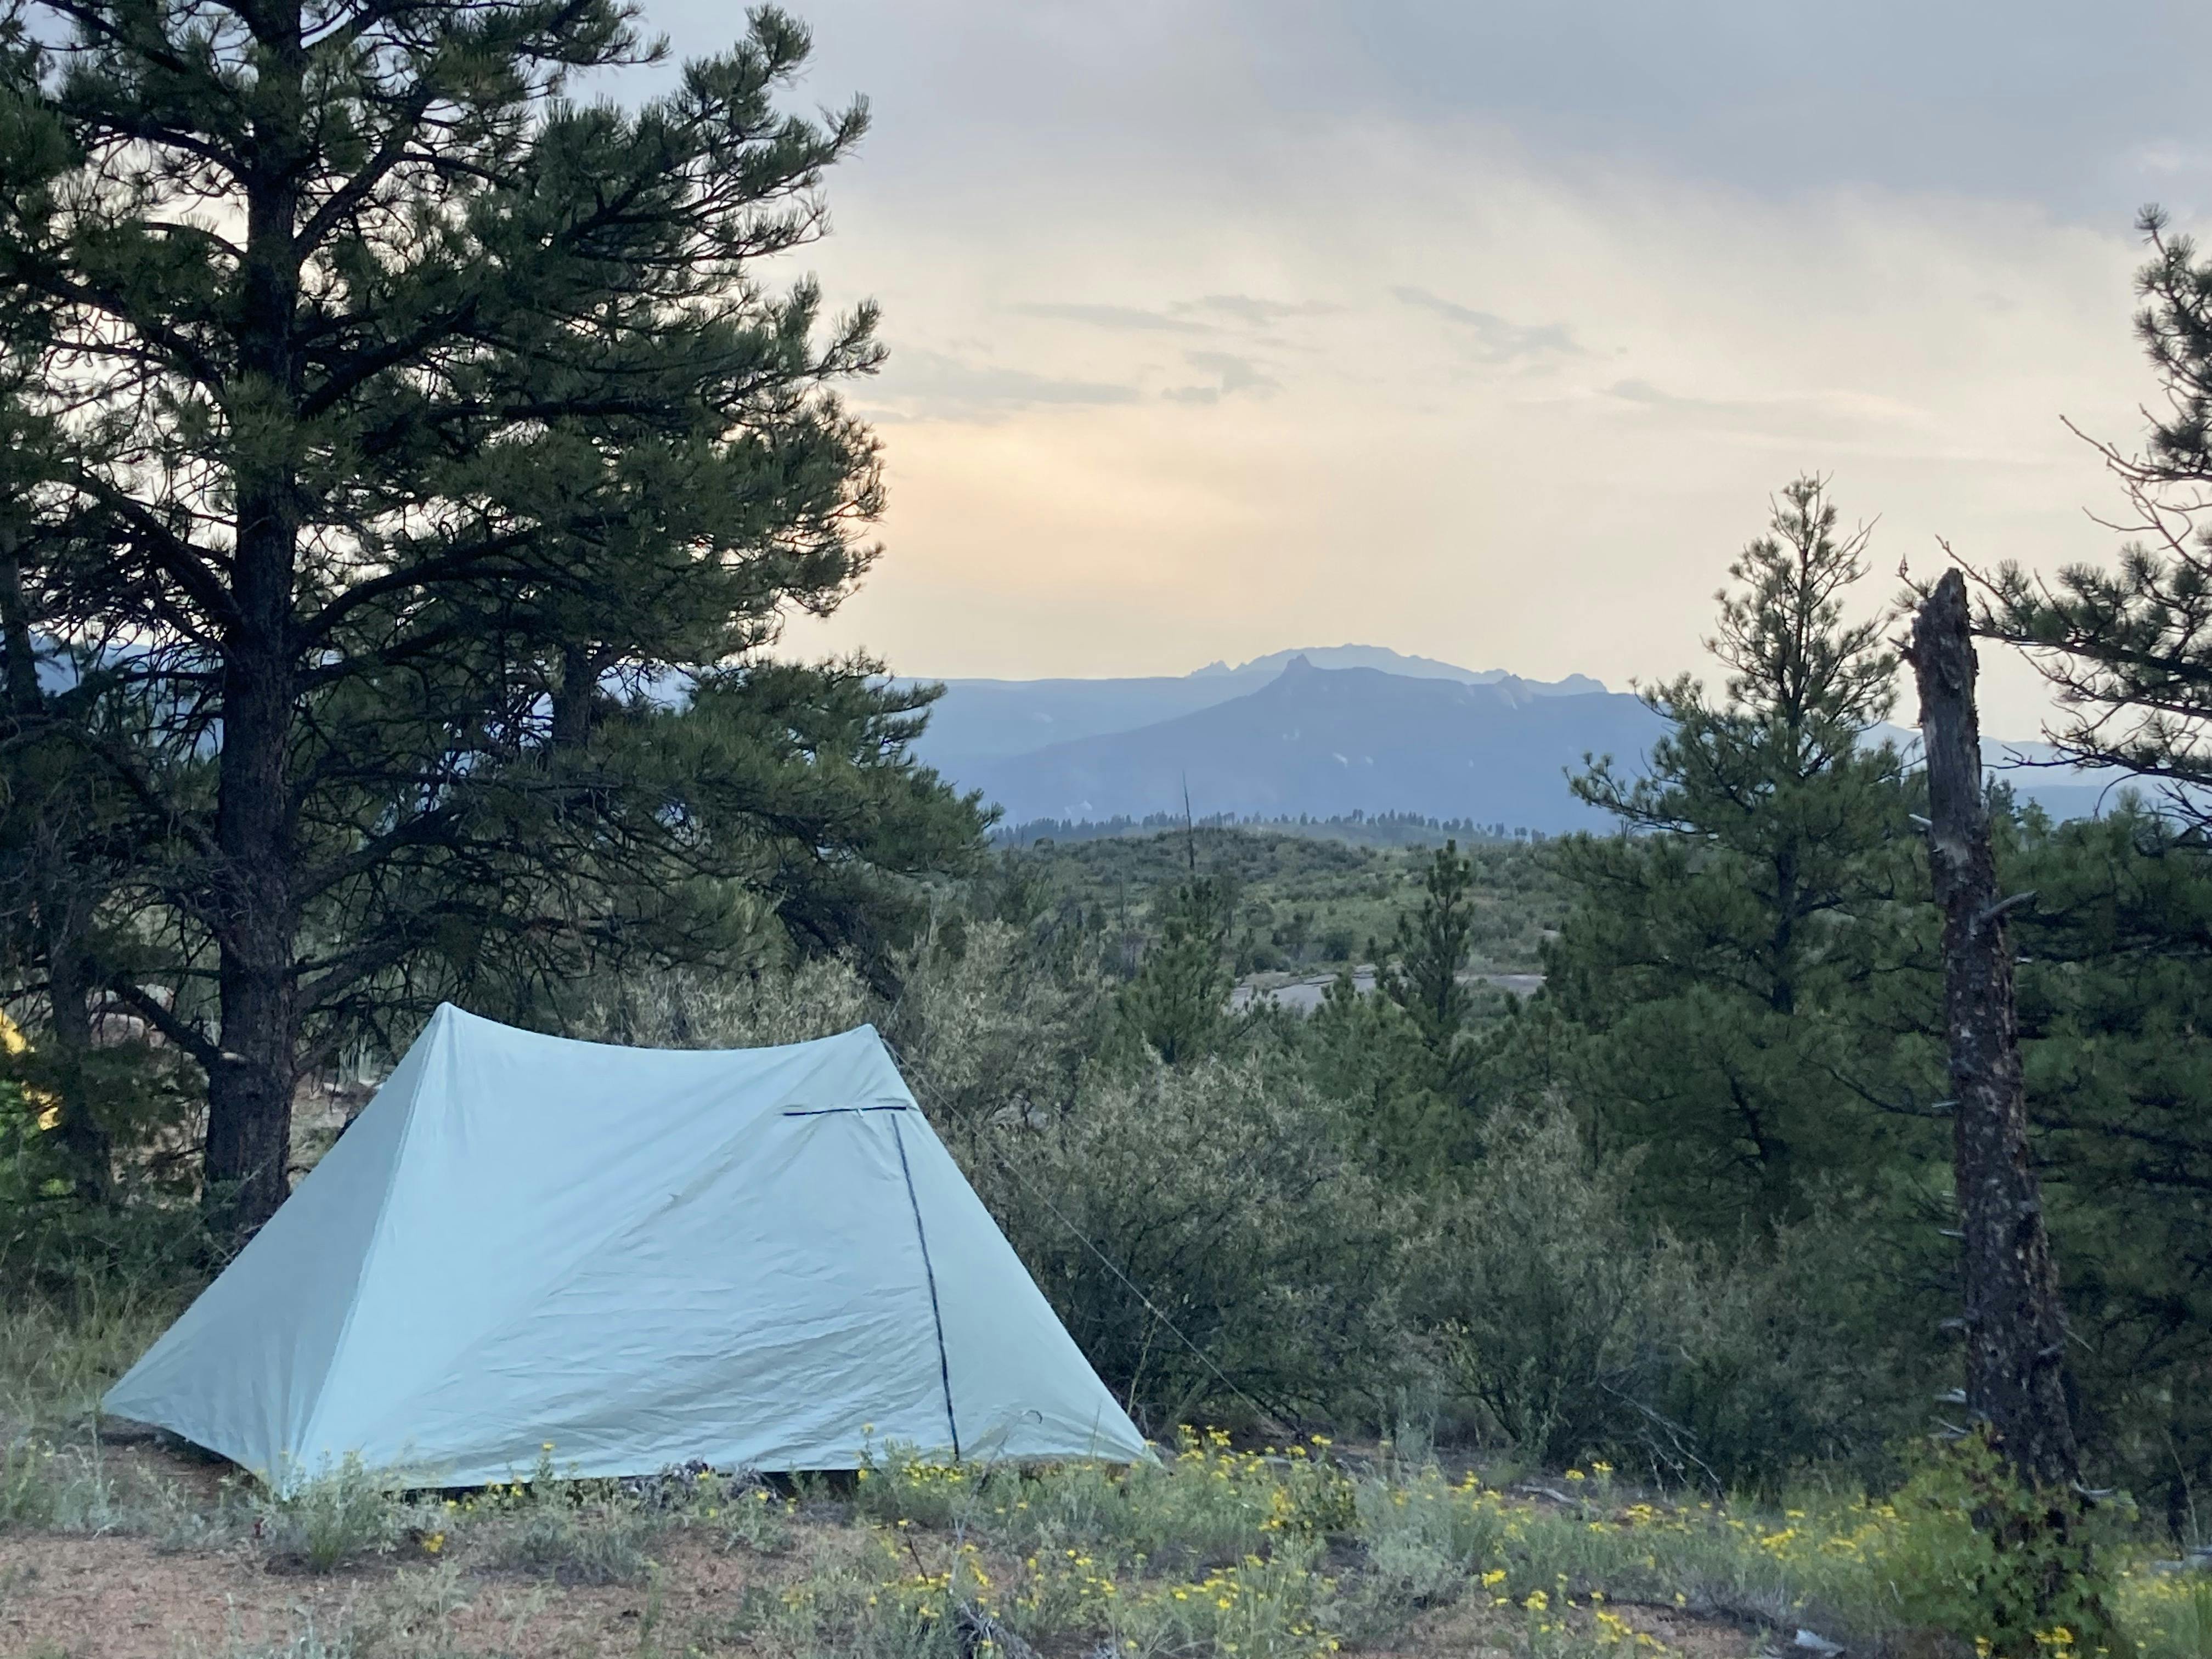 A tent in some trees with mountains in the background.